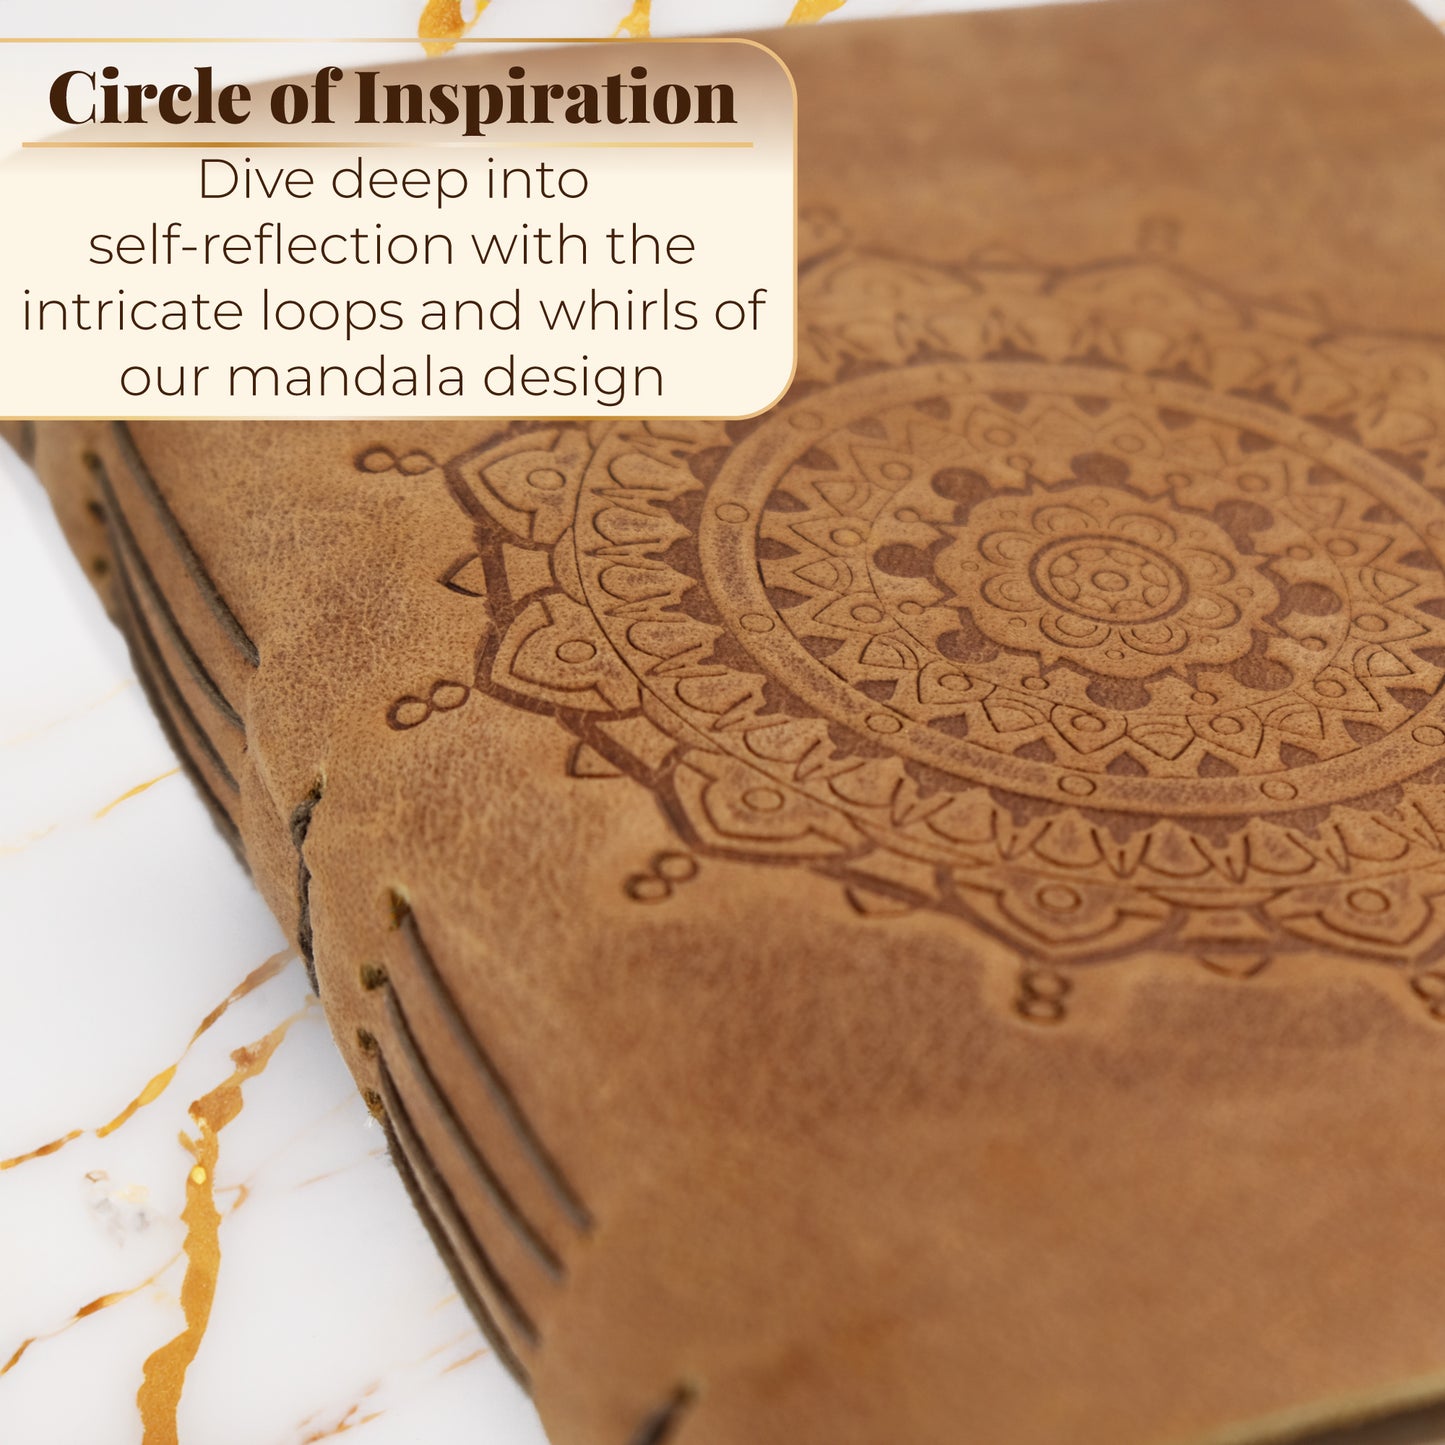 Leather Journal with Lined Pages - Mandala Leather Bound Writing Journal for Women and Men (5x7 in)